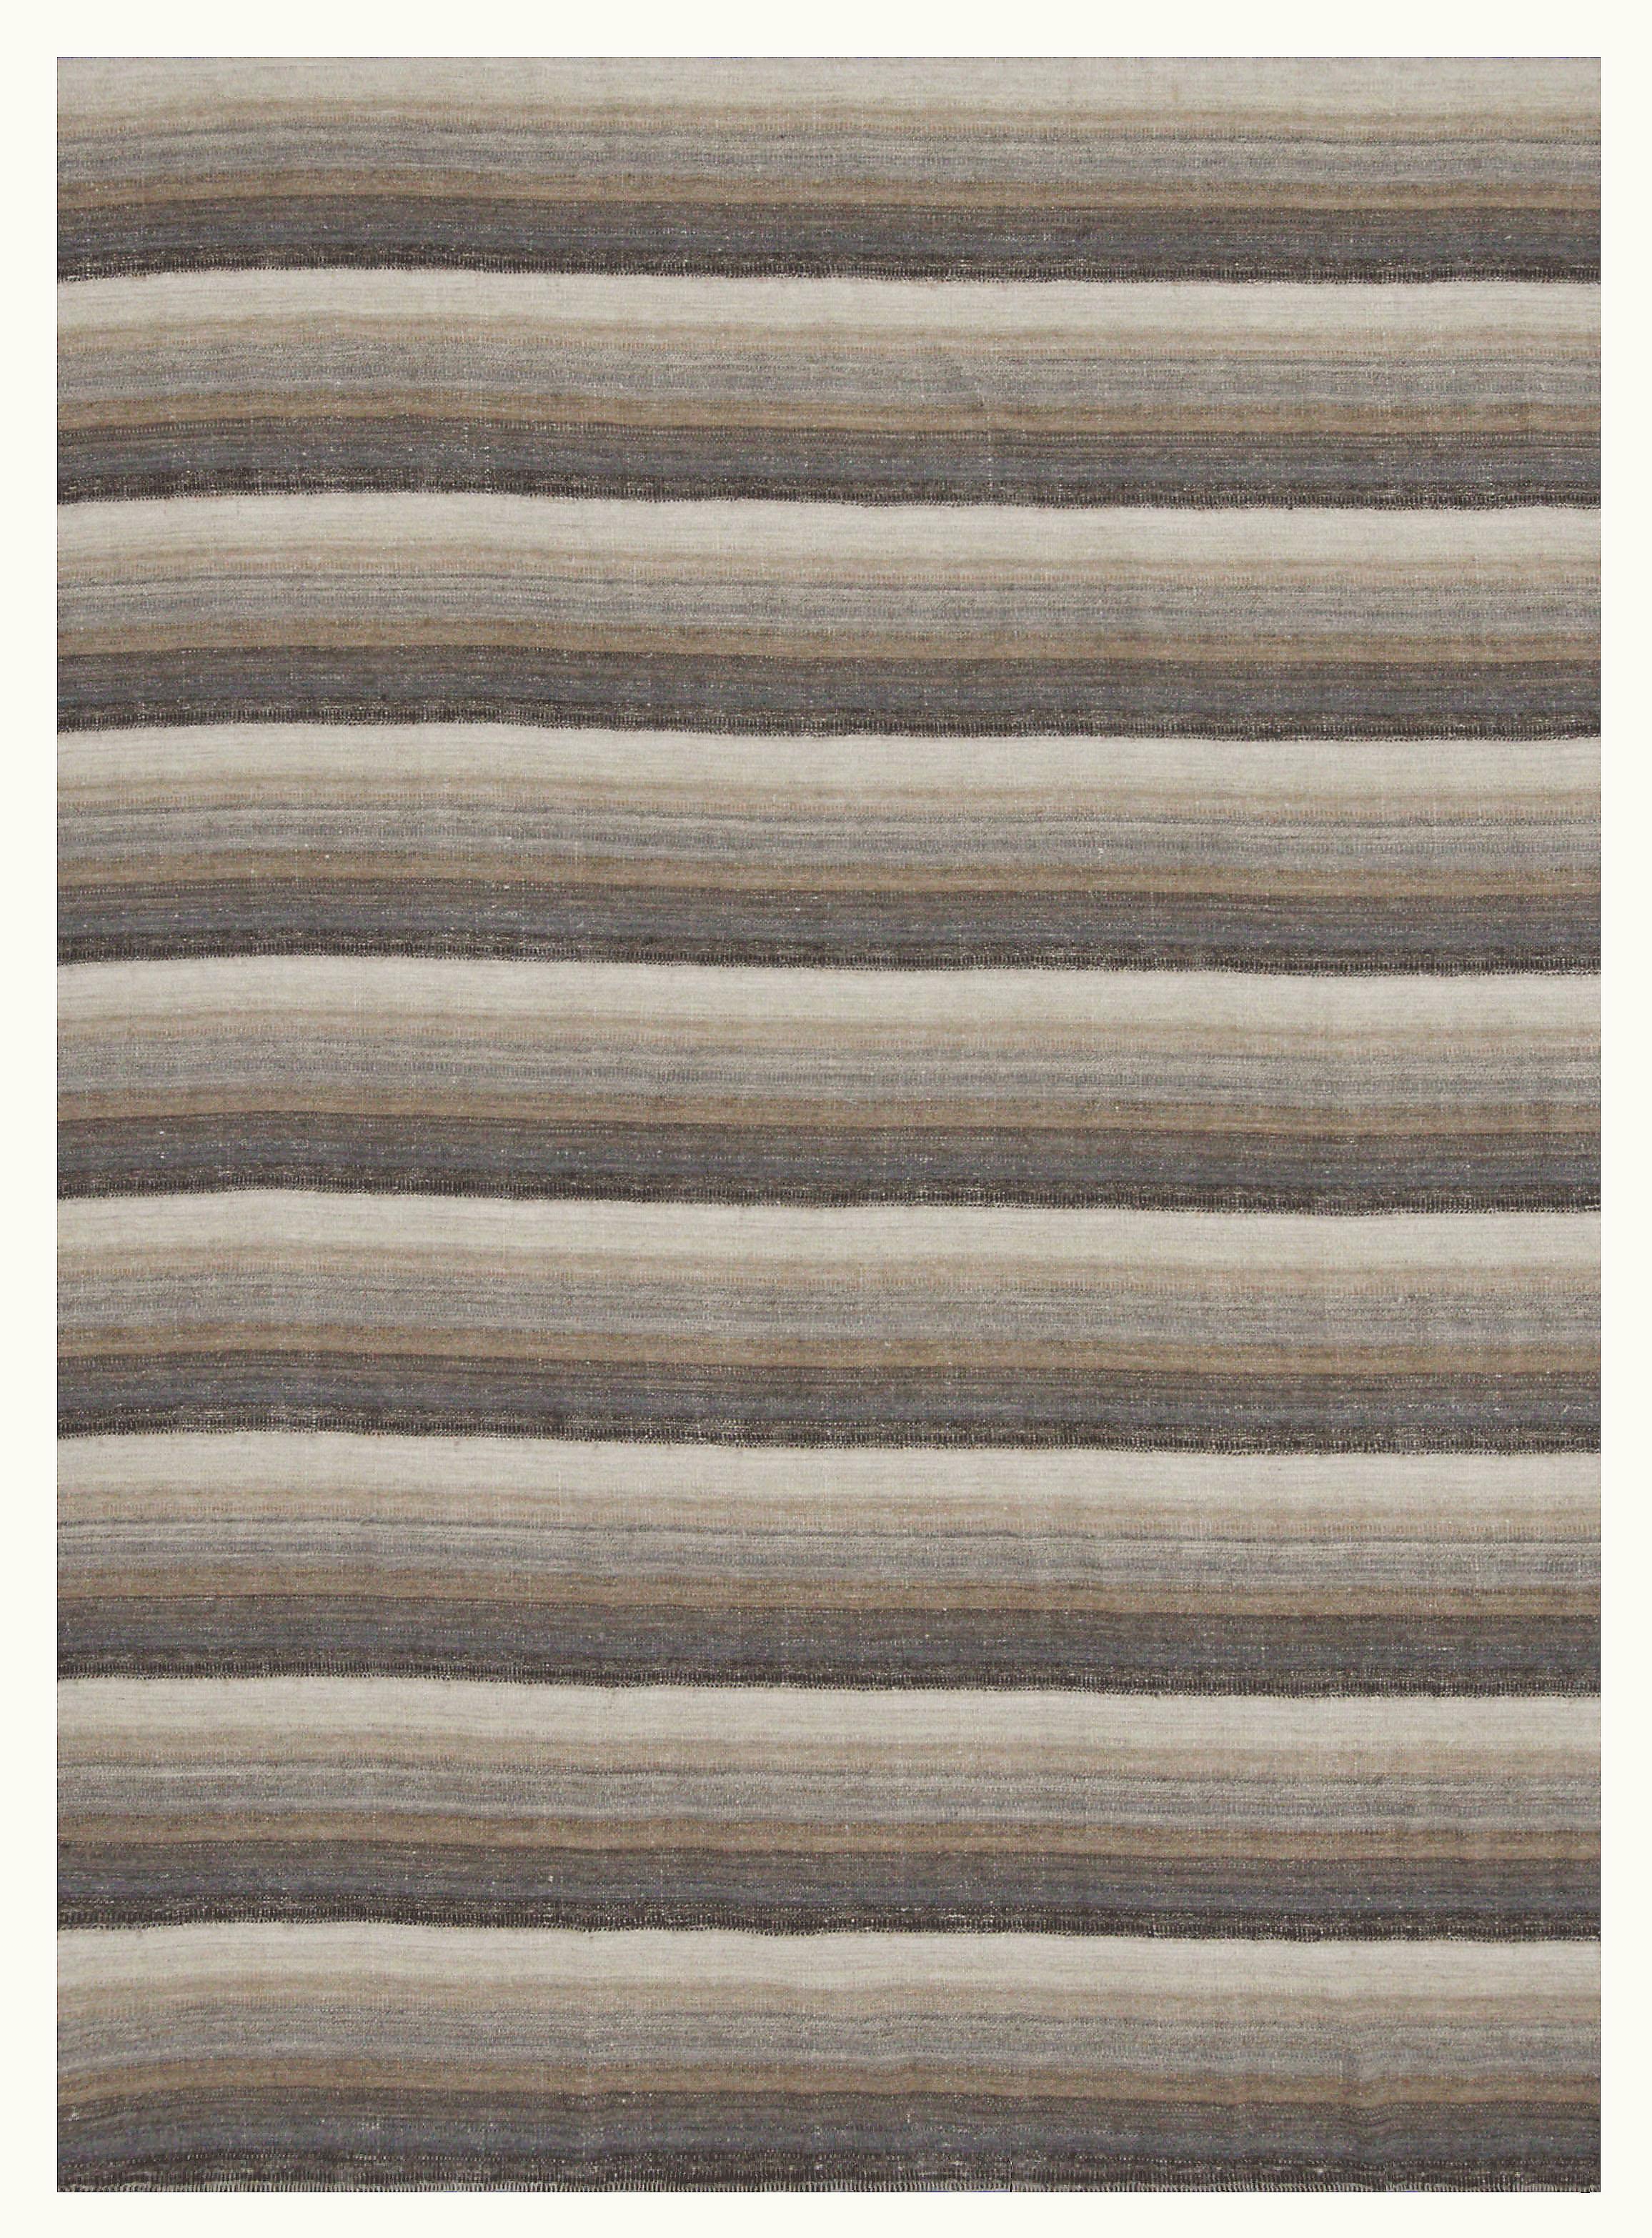 A new production Turkish rug handwoven from the finest sheep’s wool and colored with all-natural vegetable dyes that are safe for humans and pets. It’s a traditional Kilim flat-weave design featuring a beautiful ivory field with a mix of beige,